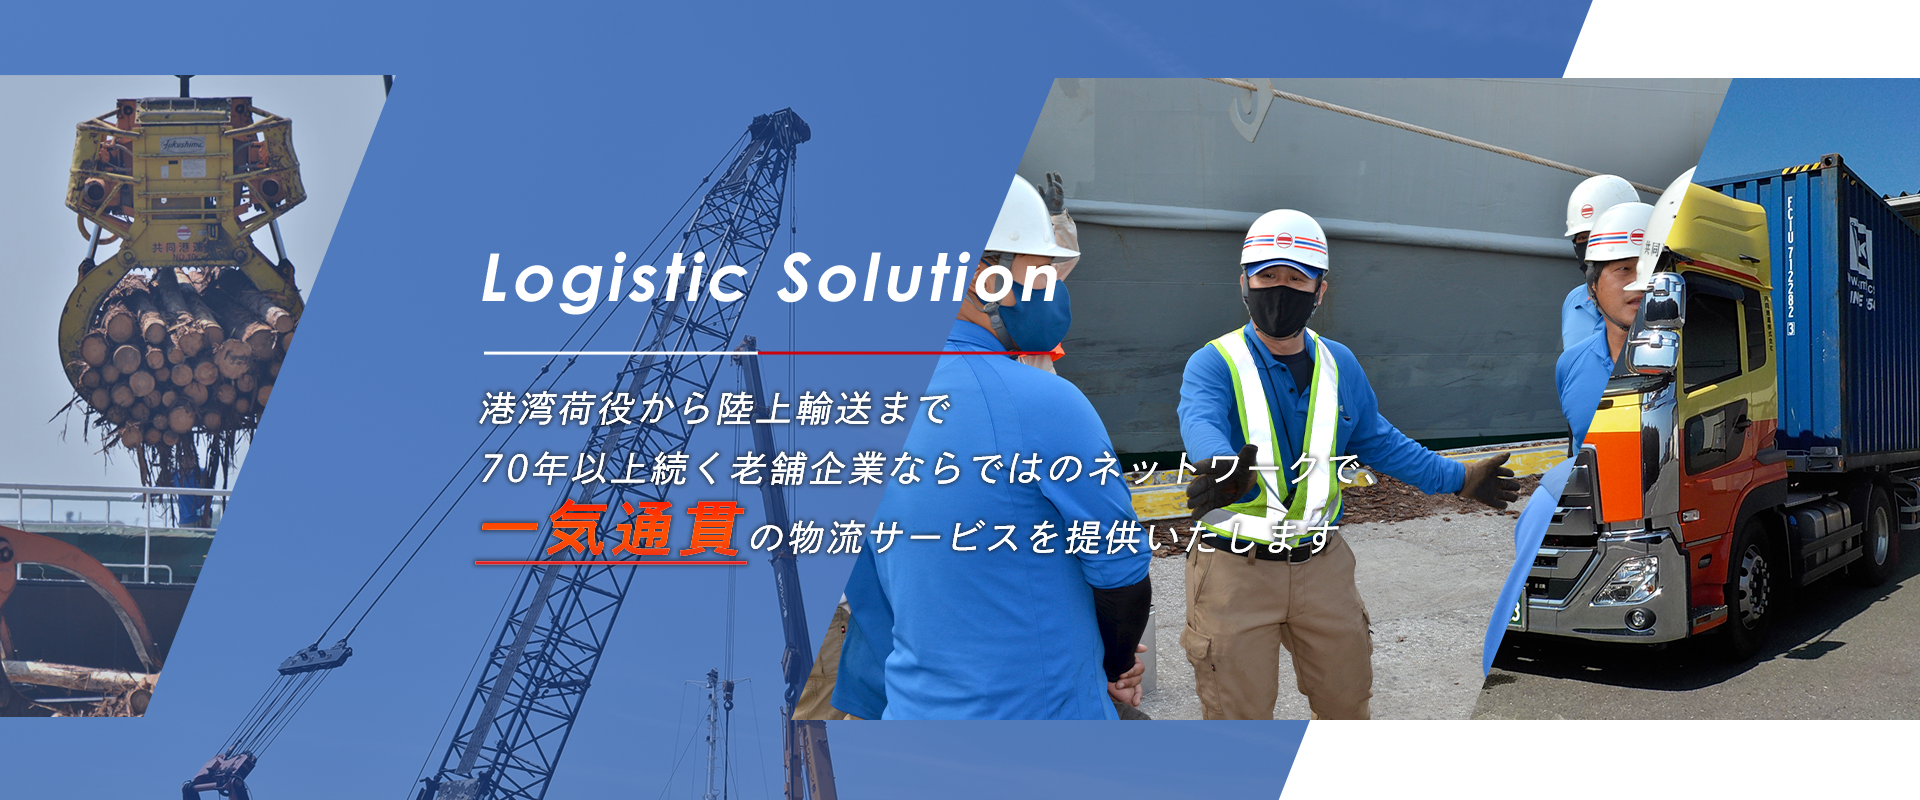 Logistic Solution